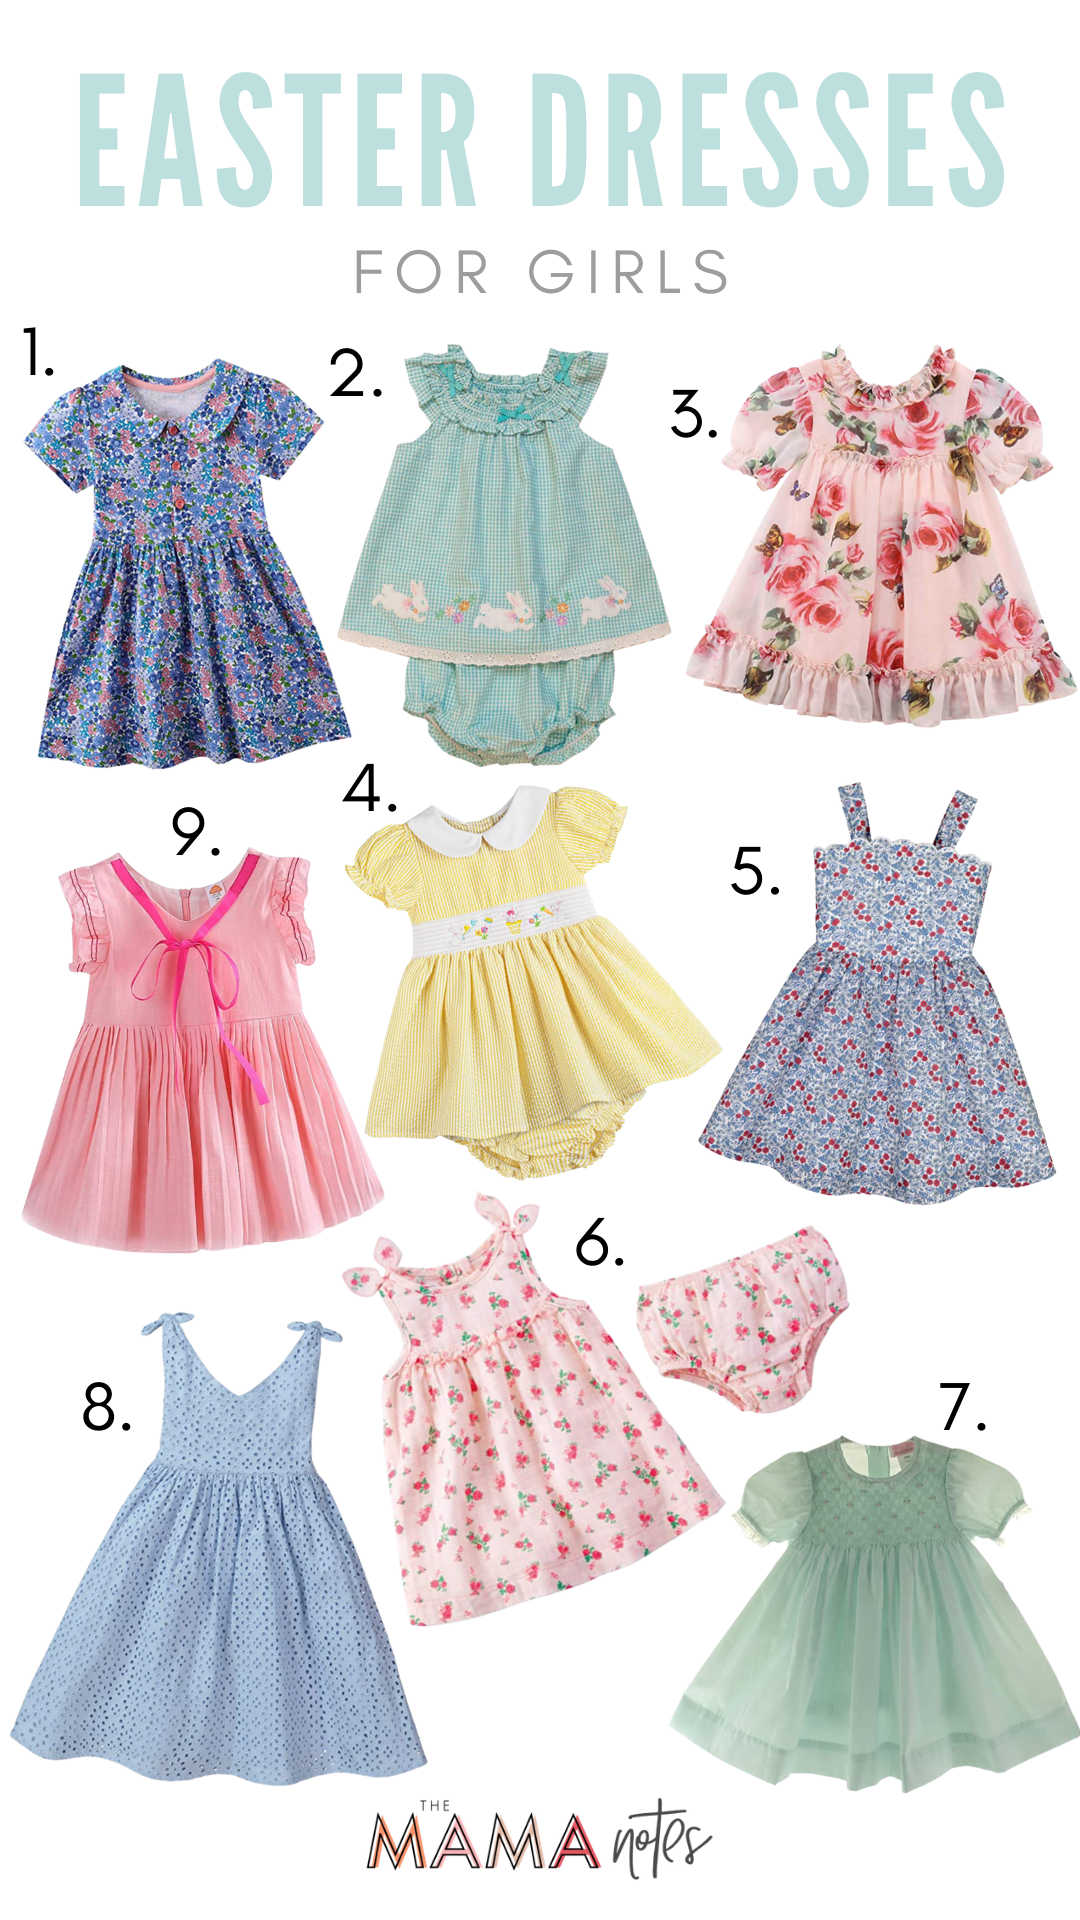 Easter Dresses for Girls - The Mama Notes